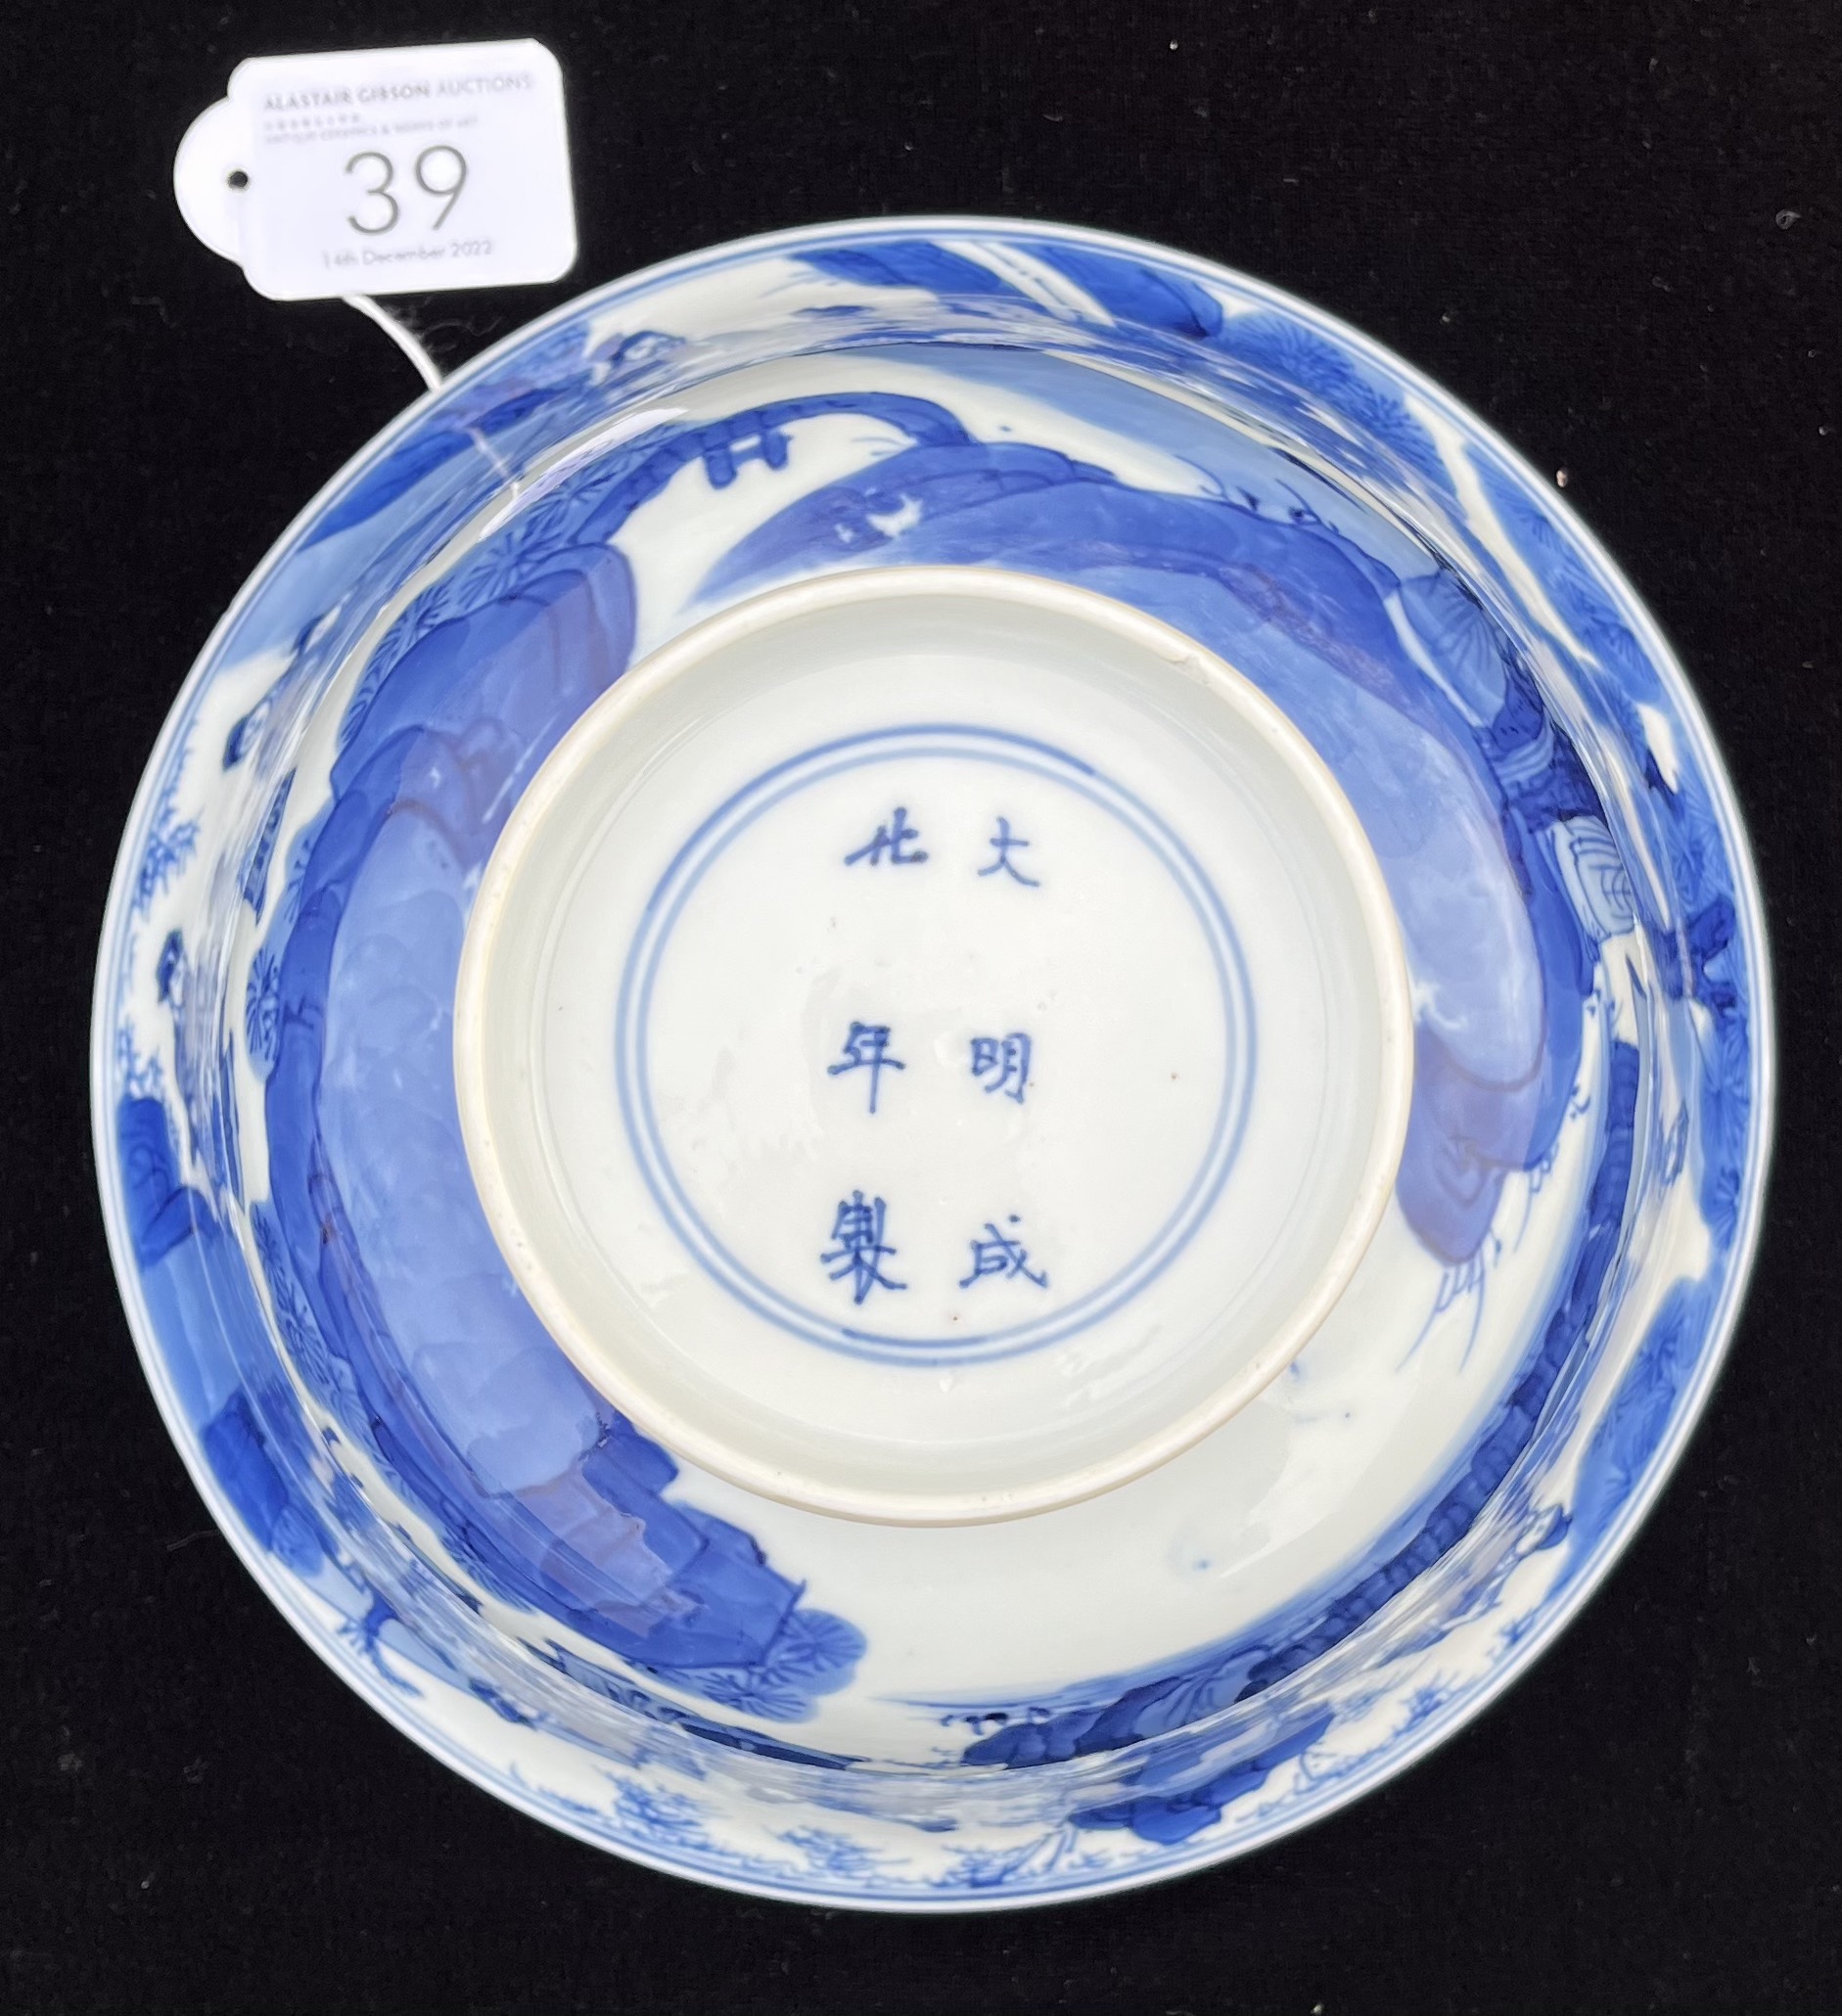 A GOOD CHINESE BLUE AND WHITE PORCELAIN ‘EIGHTEEN SCHOLARS’ BOWL, KANGXI PERIOD, 1662 – 1722 - Image 21 of 22